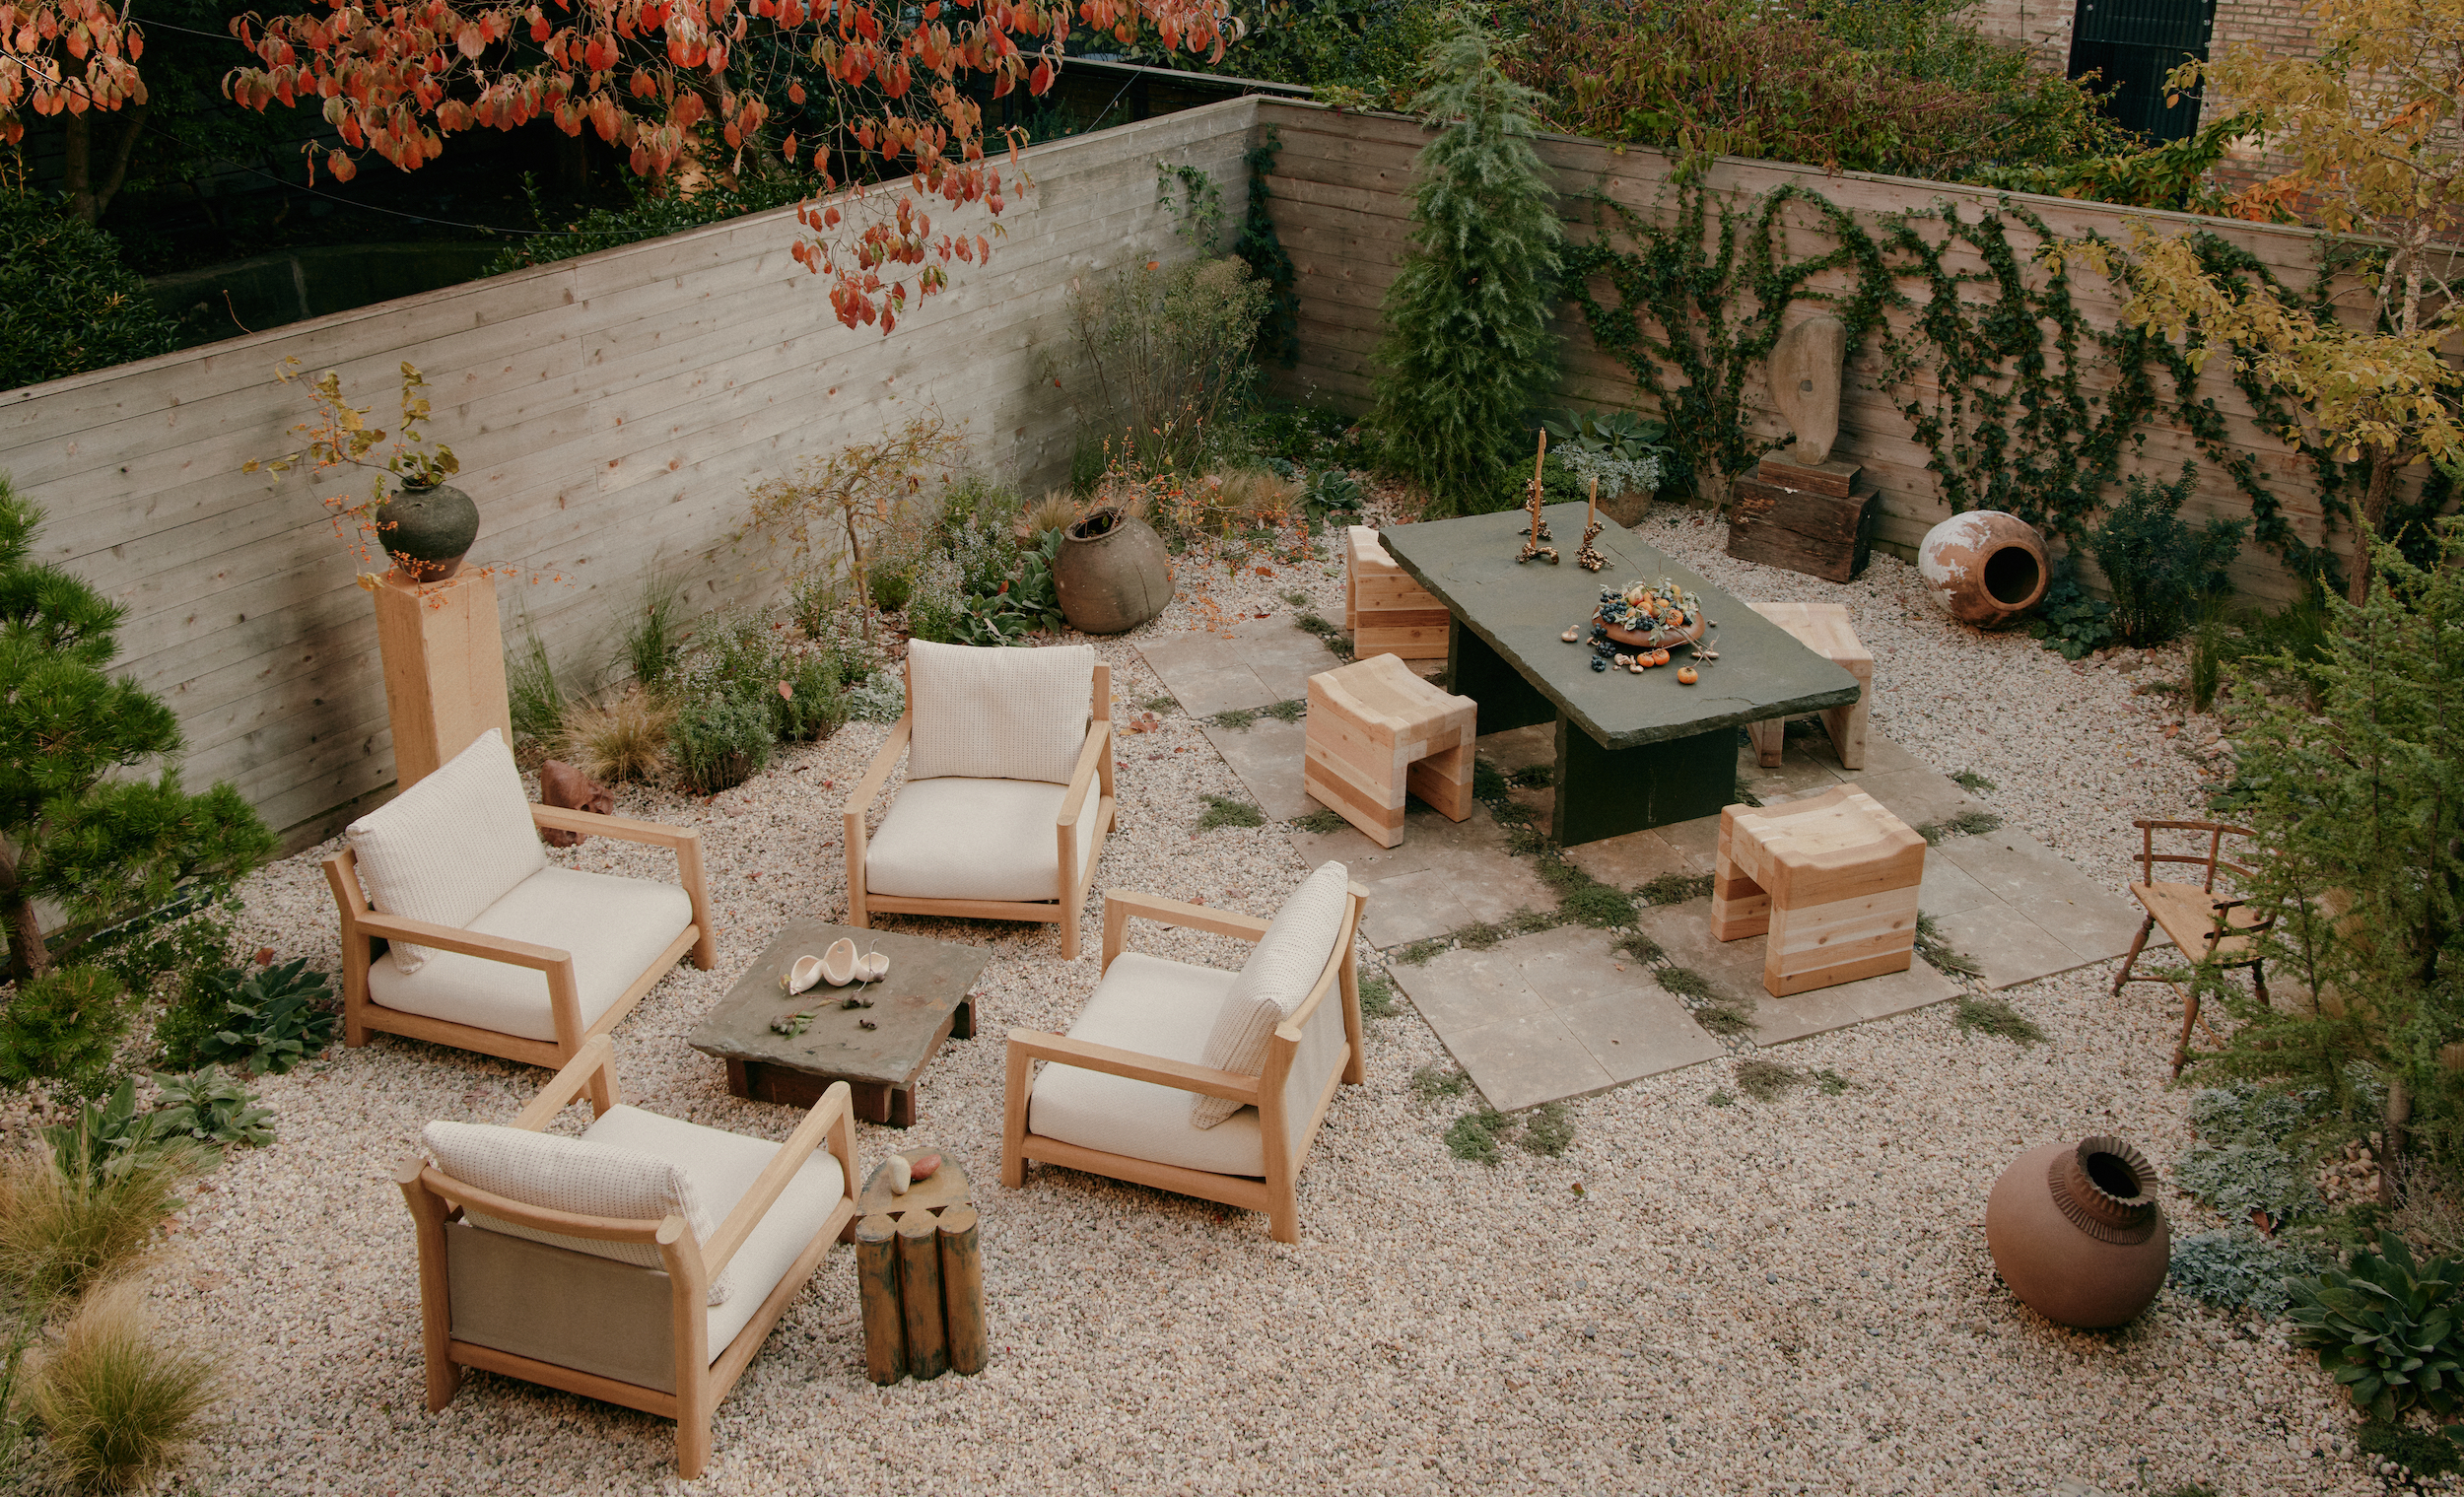 The One Area of Athena’s Brooklyn Home You’ve Never Seen: The Garden!